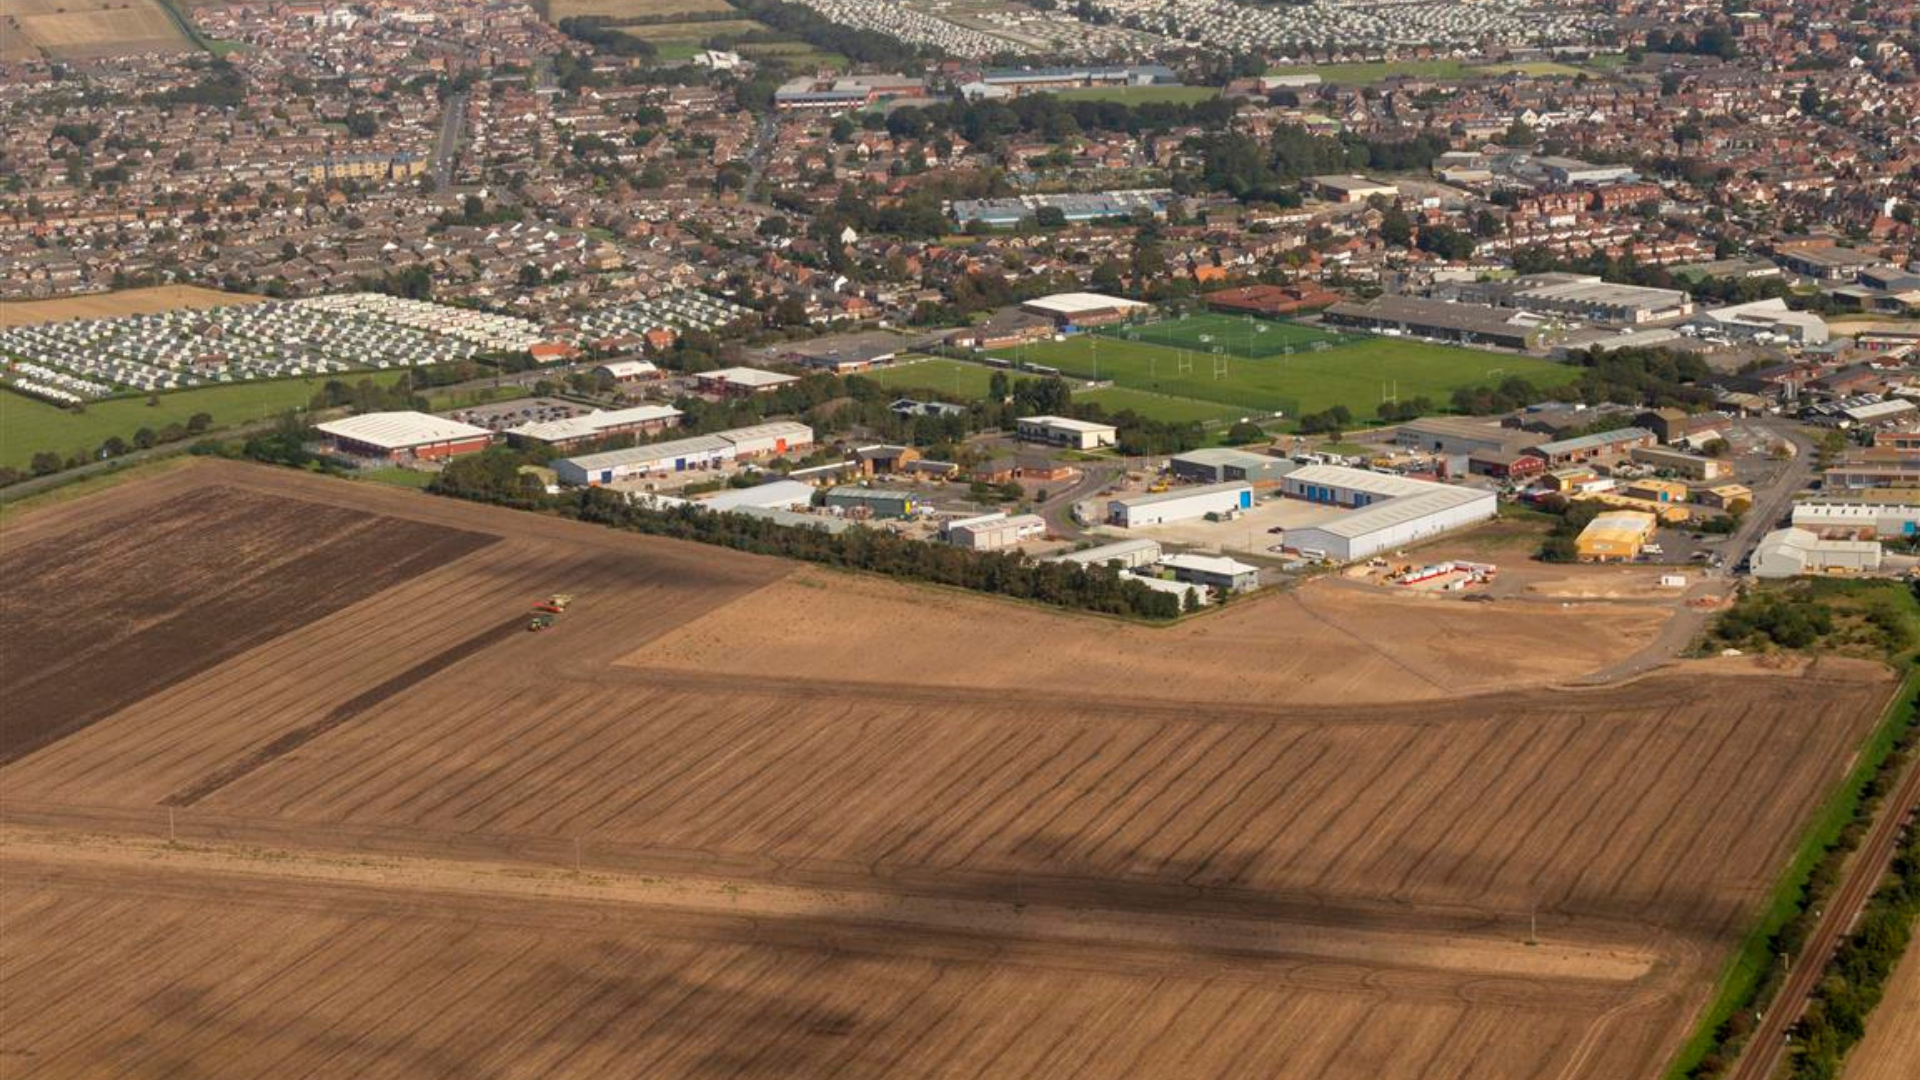 An overhead view of Skegness Business Park